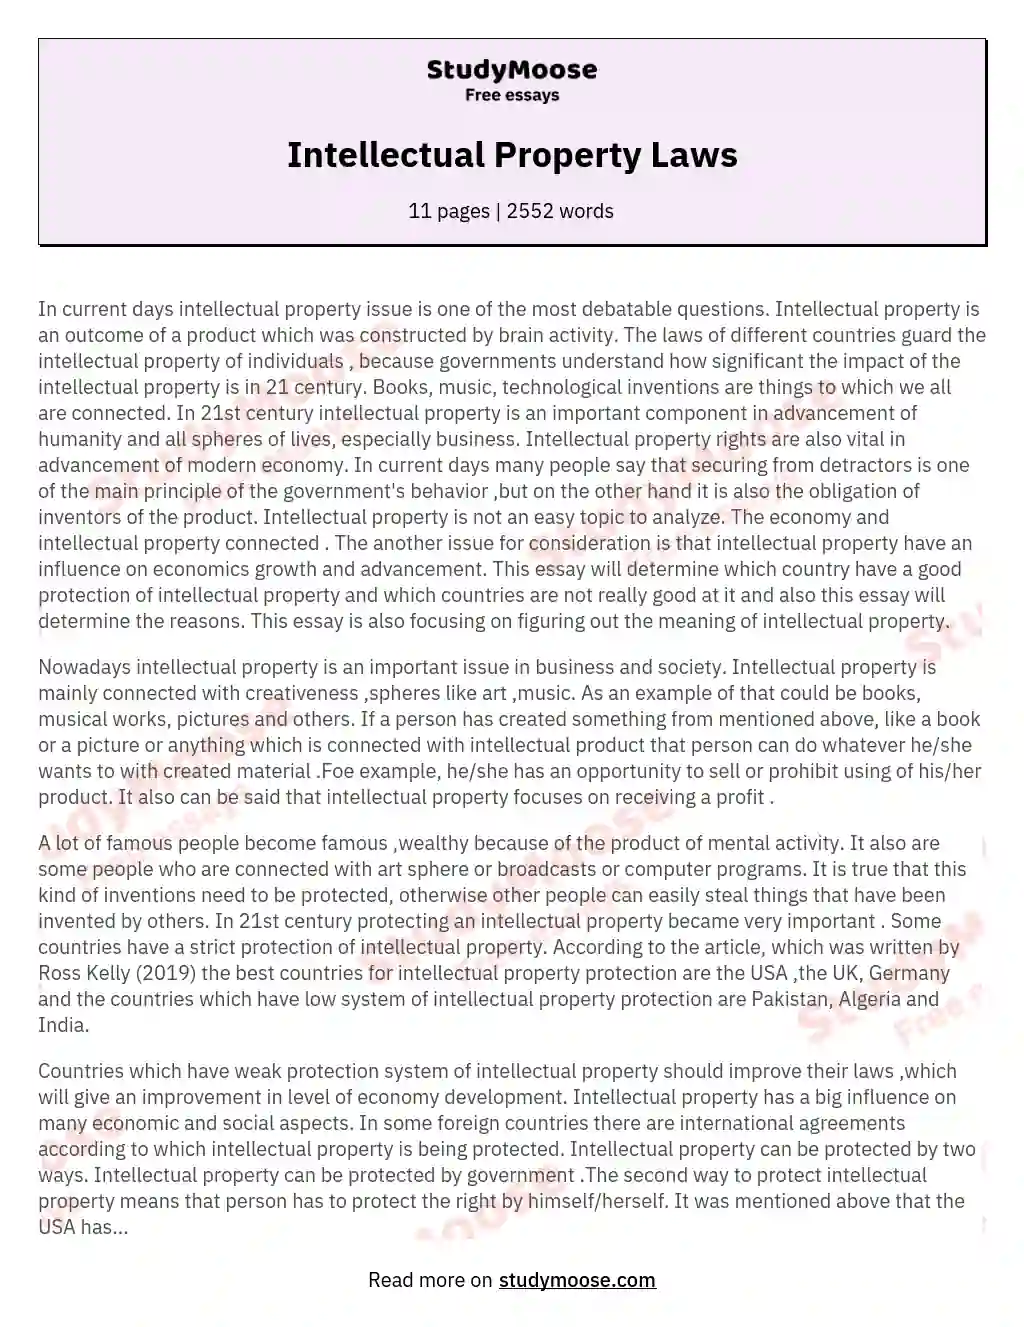 Intellectual Property Laws essay